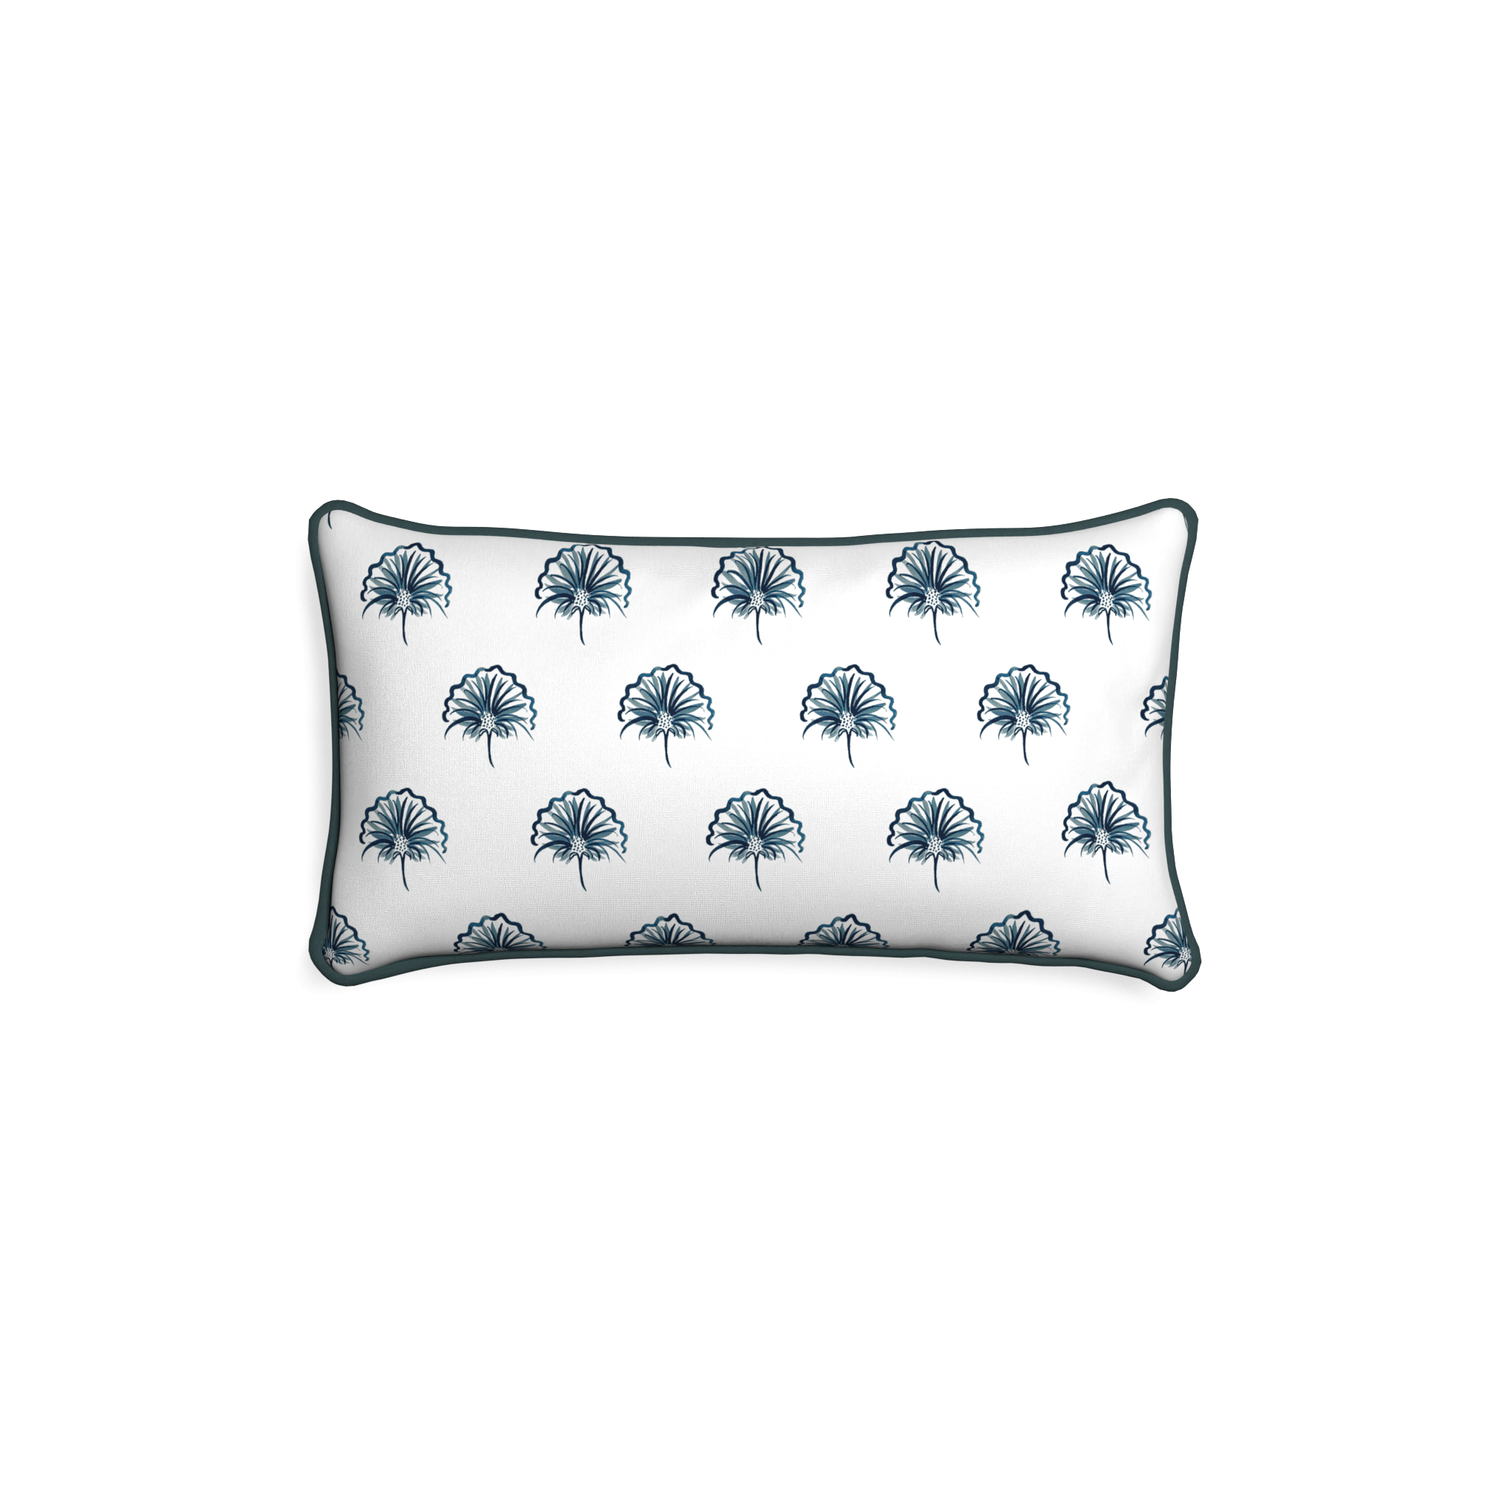 Petite-lumbar penelope midnight custom floral navypillow with p piping on white background